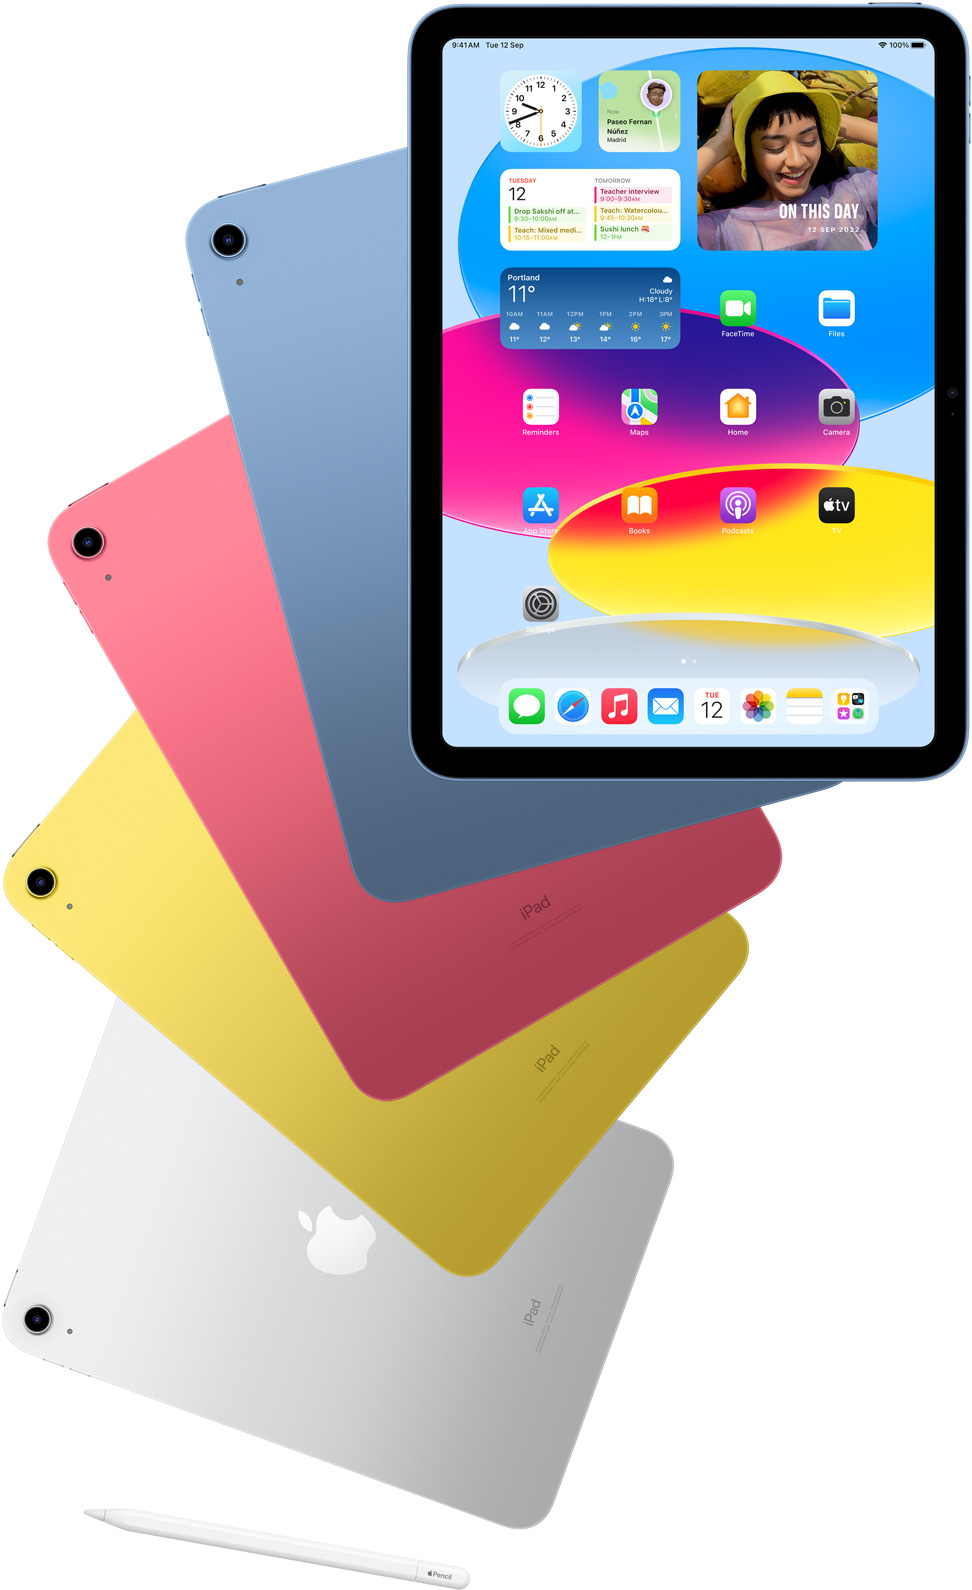 Front-view iPad shows home screen with blue, pink, yellow and silver rear-facing iPads behind it. An Apple Pencil sits near the arranged iPad models.